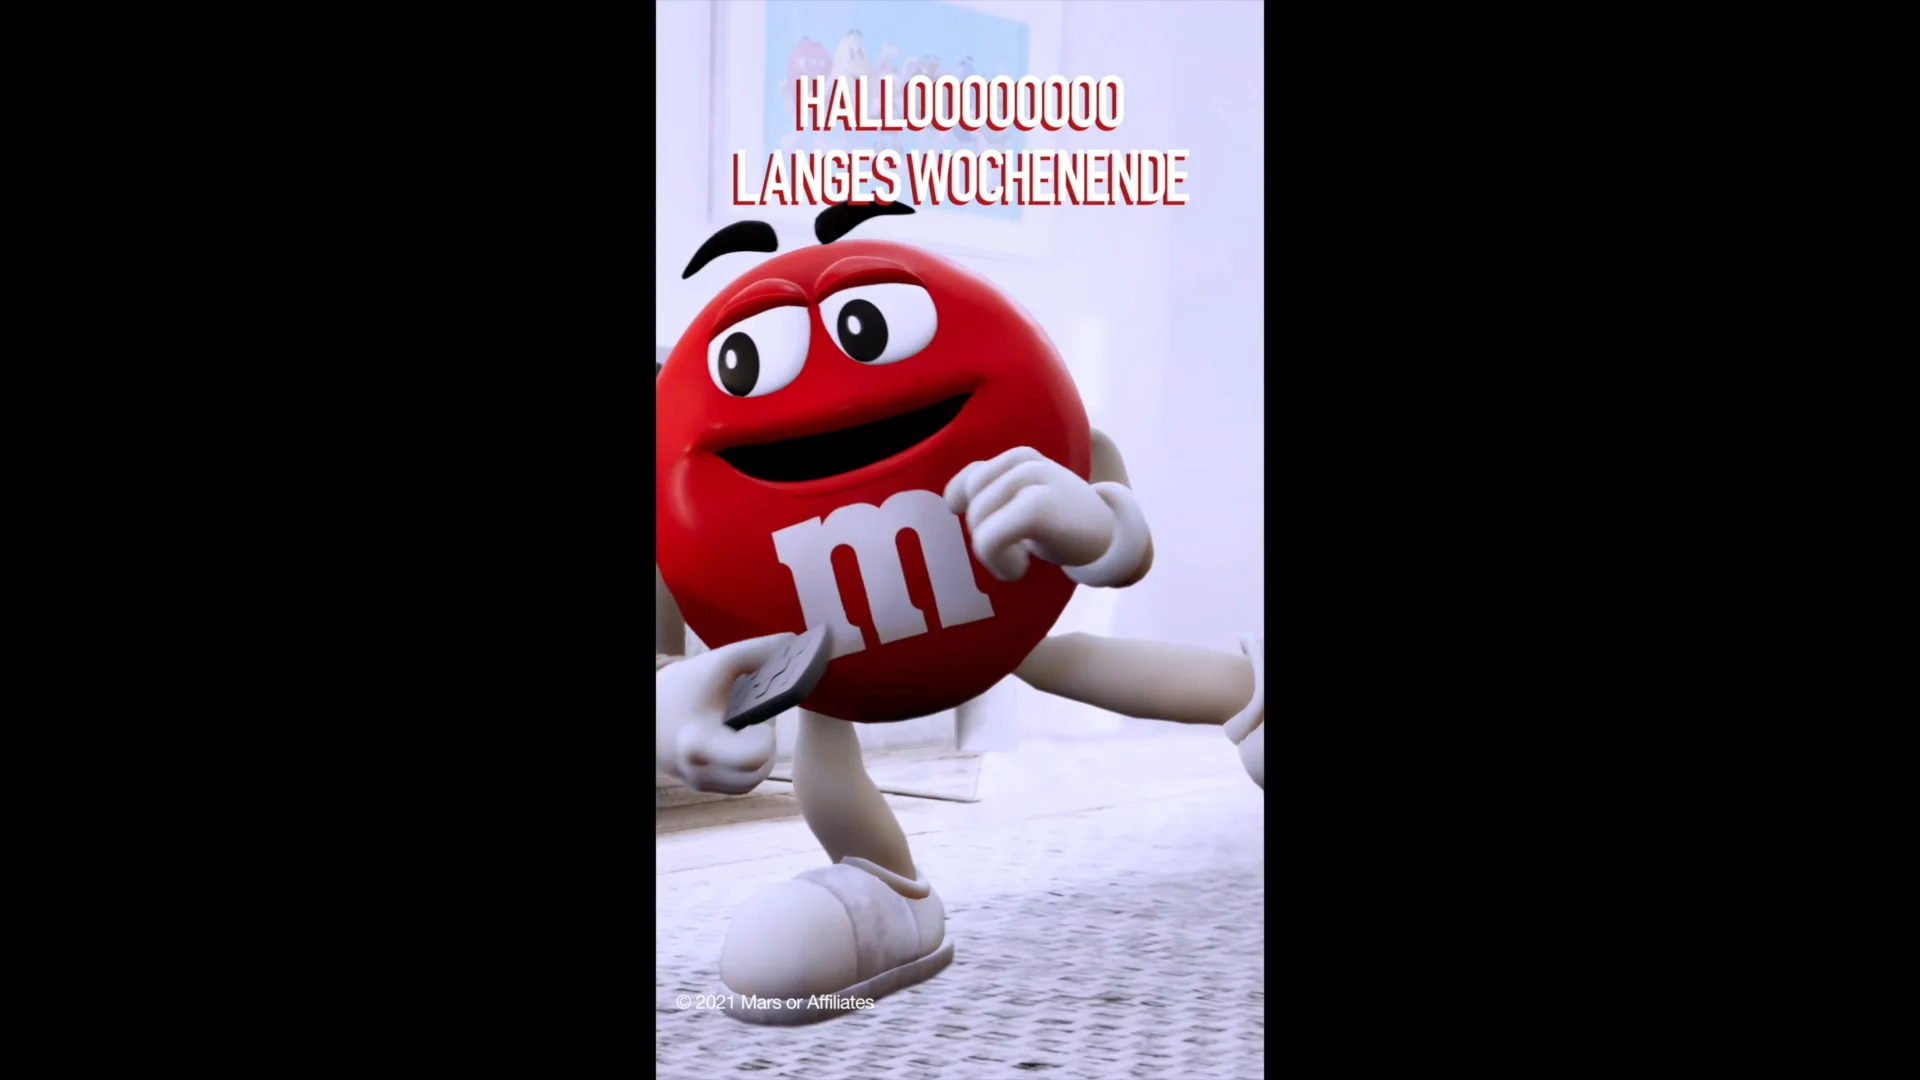 M&M's Malaysia - Make your screentime 3x more fun with